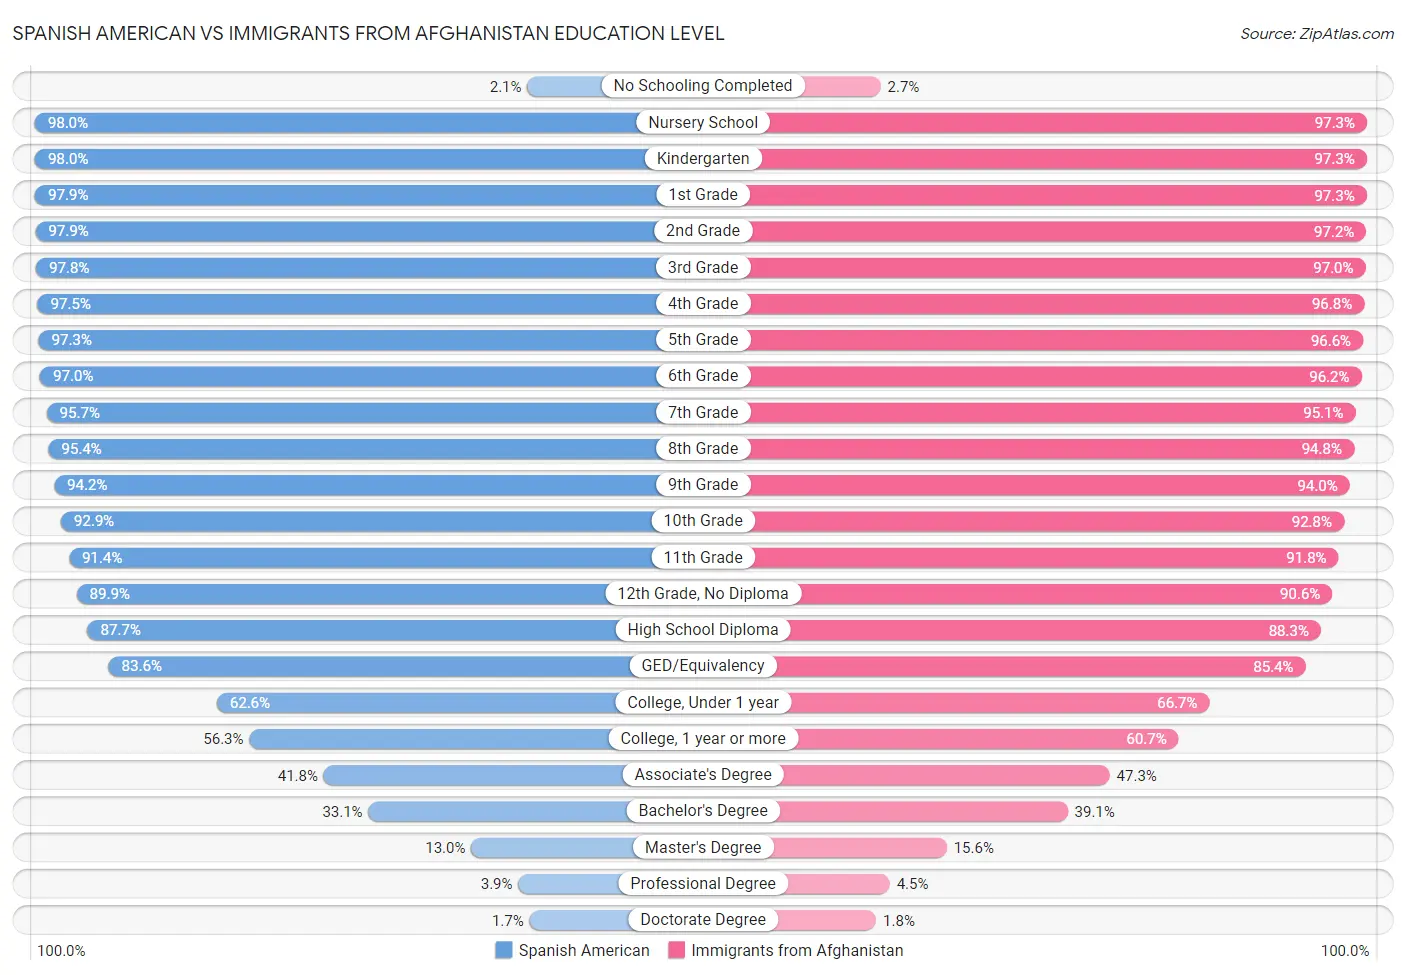 Spanish American vs Immigrants from Afghanistan Education Level